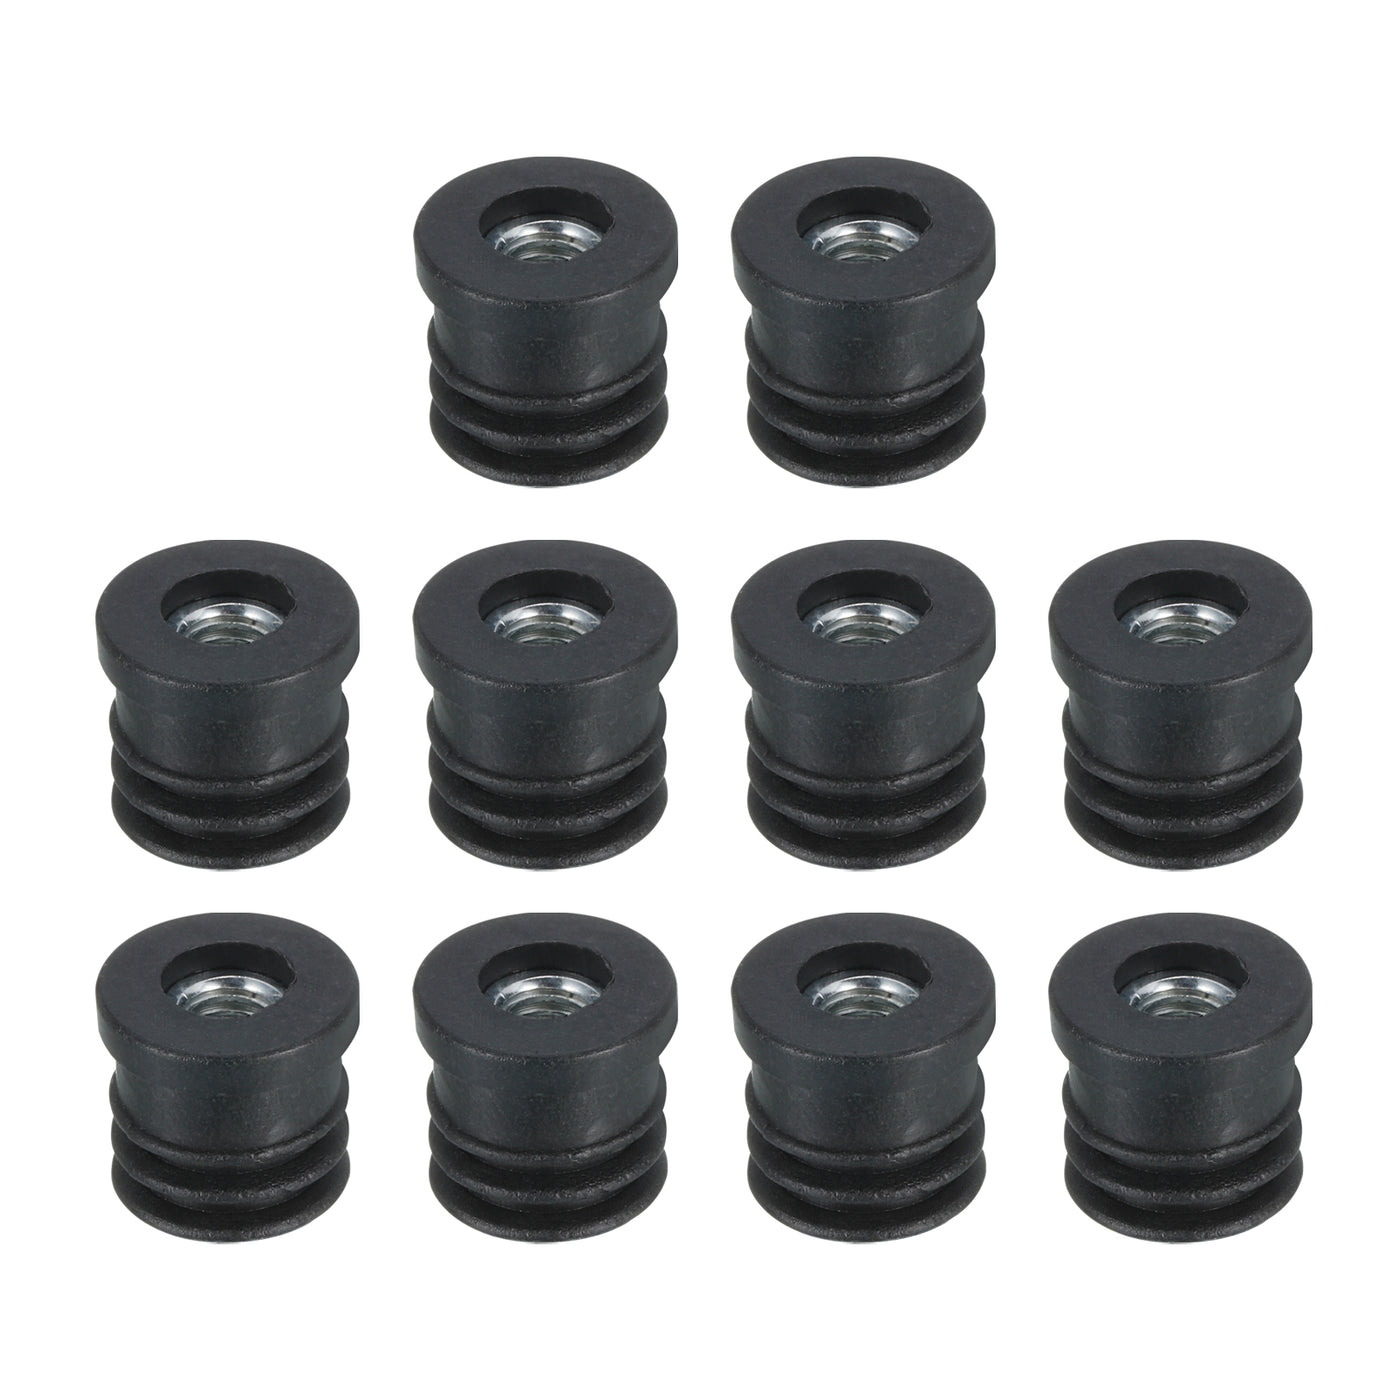 uxcell Uxcell 10Pcs Caster Insert with Thread, 16mm/0.63" M6 Thread for Furniture